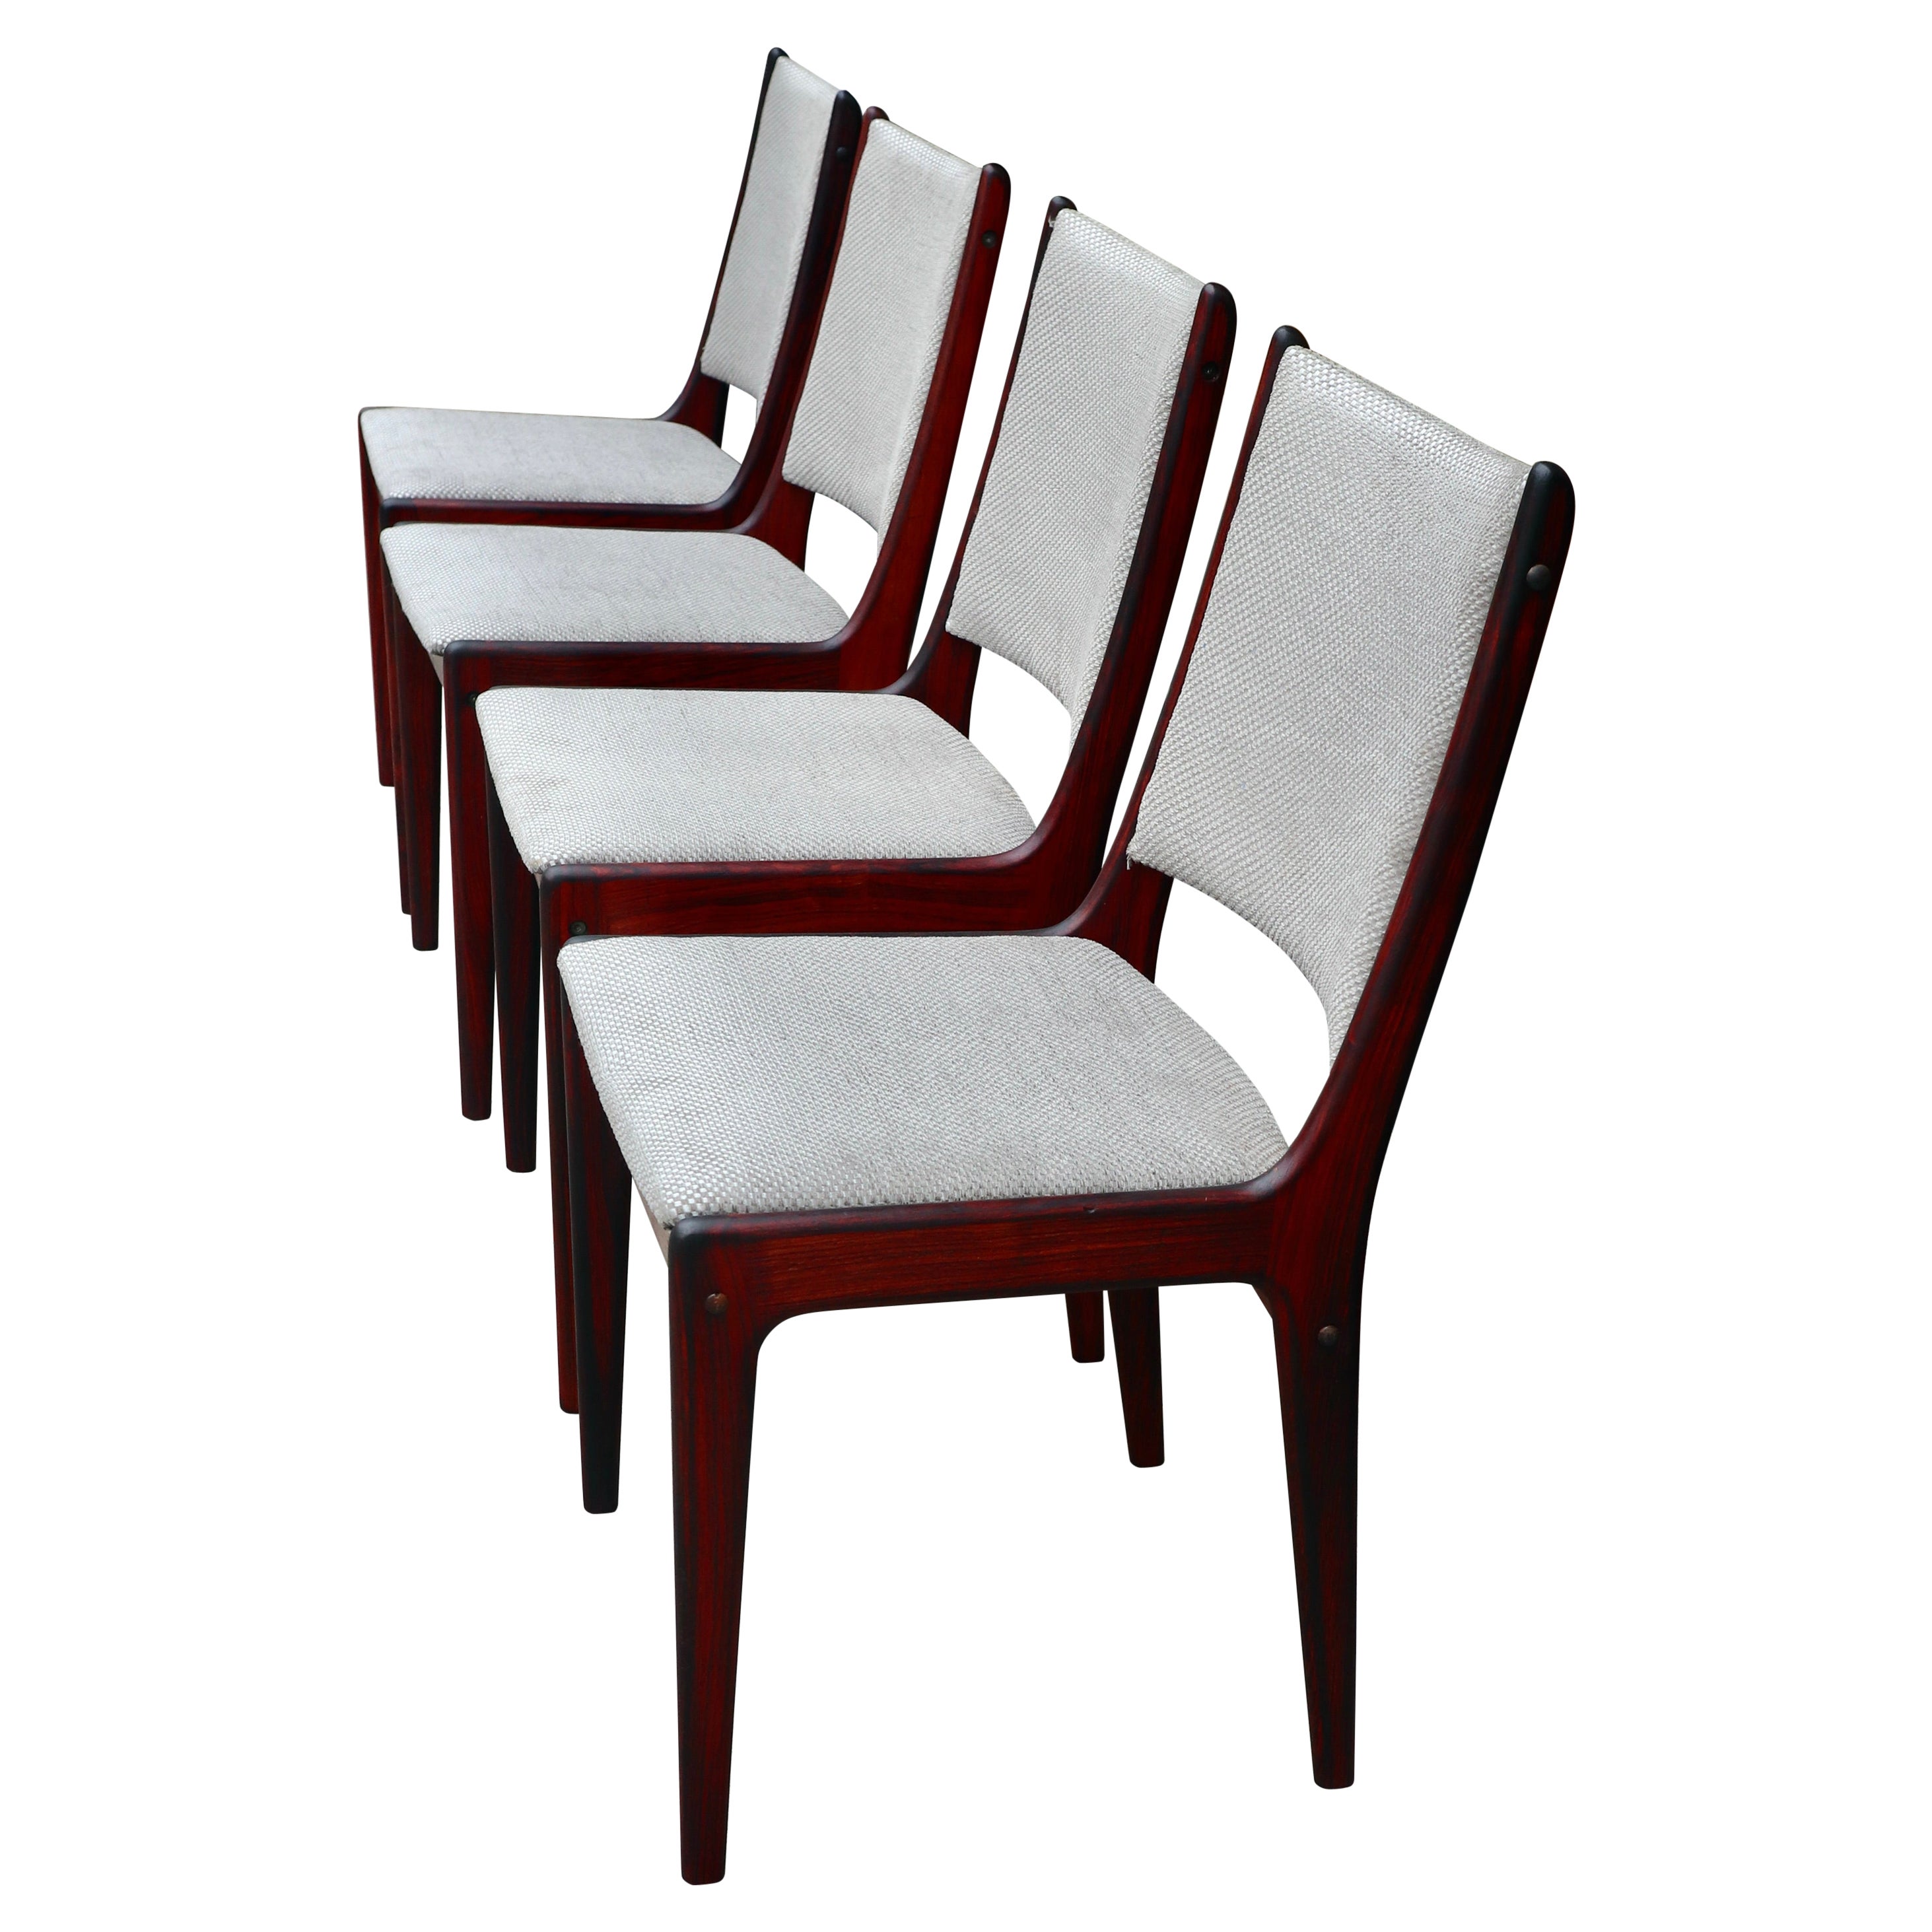 Four rosewood dining Chairs by Johannes Andersen for Uldum Møbelfabrik 1960s